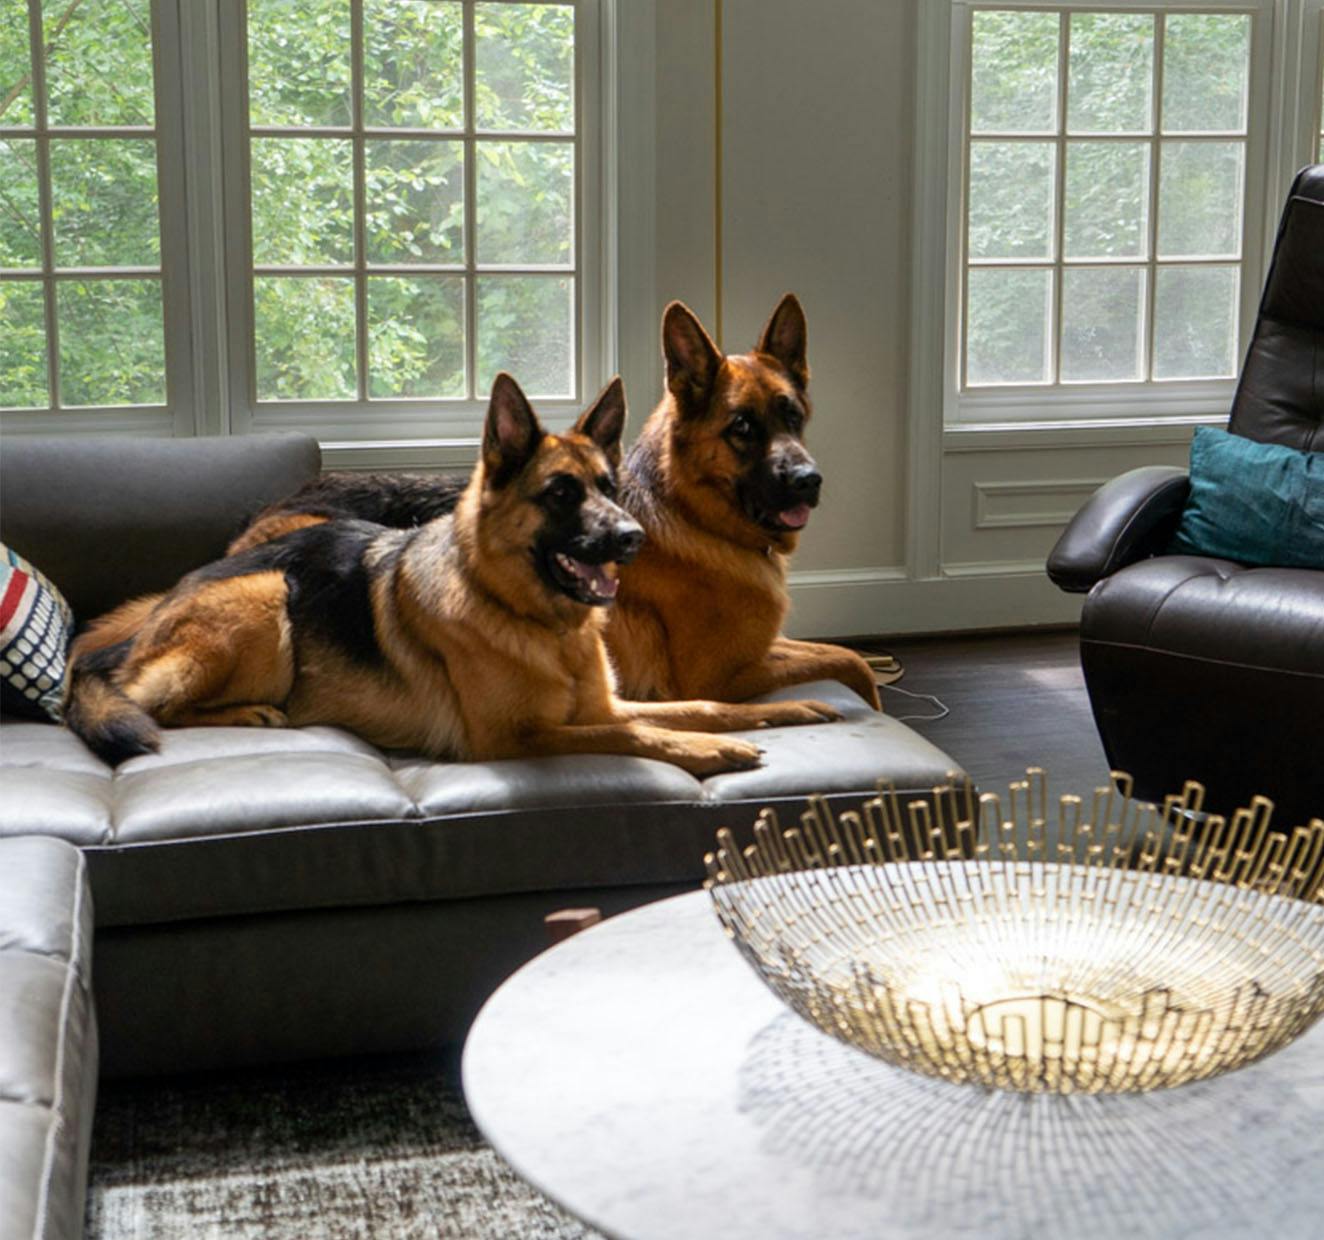 Maid-Bright-Professional-House-Cleaning-About-2-German-Shepards-On-Couch